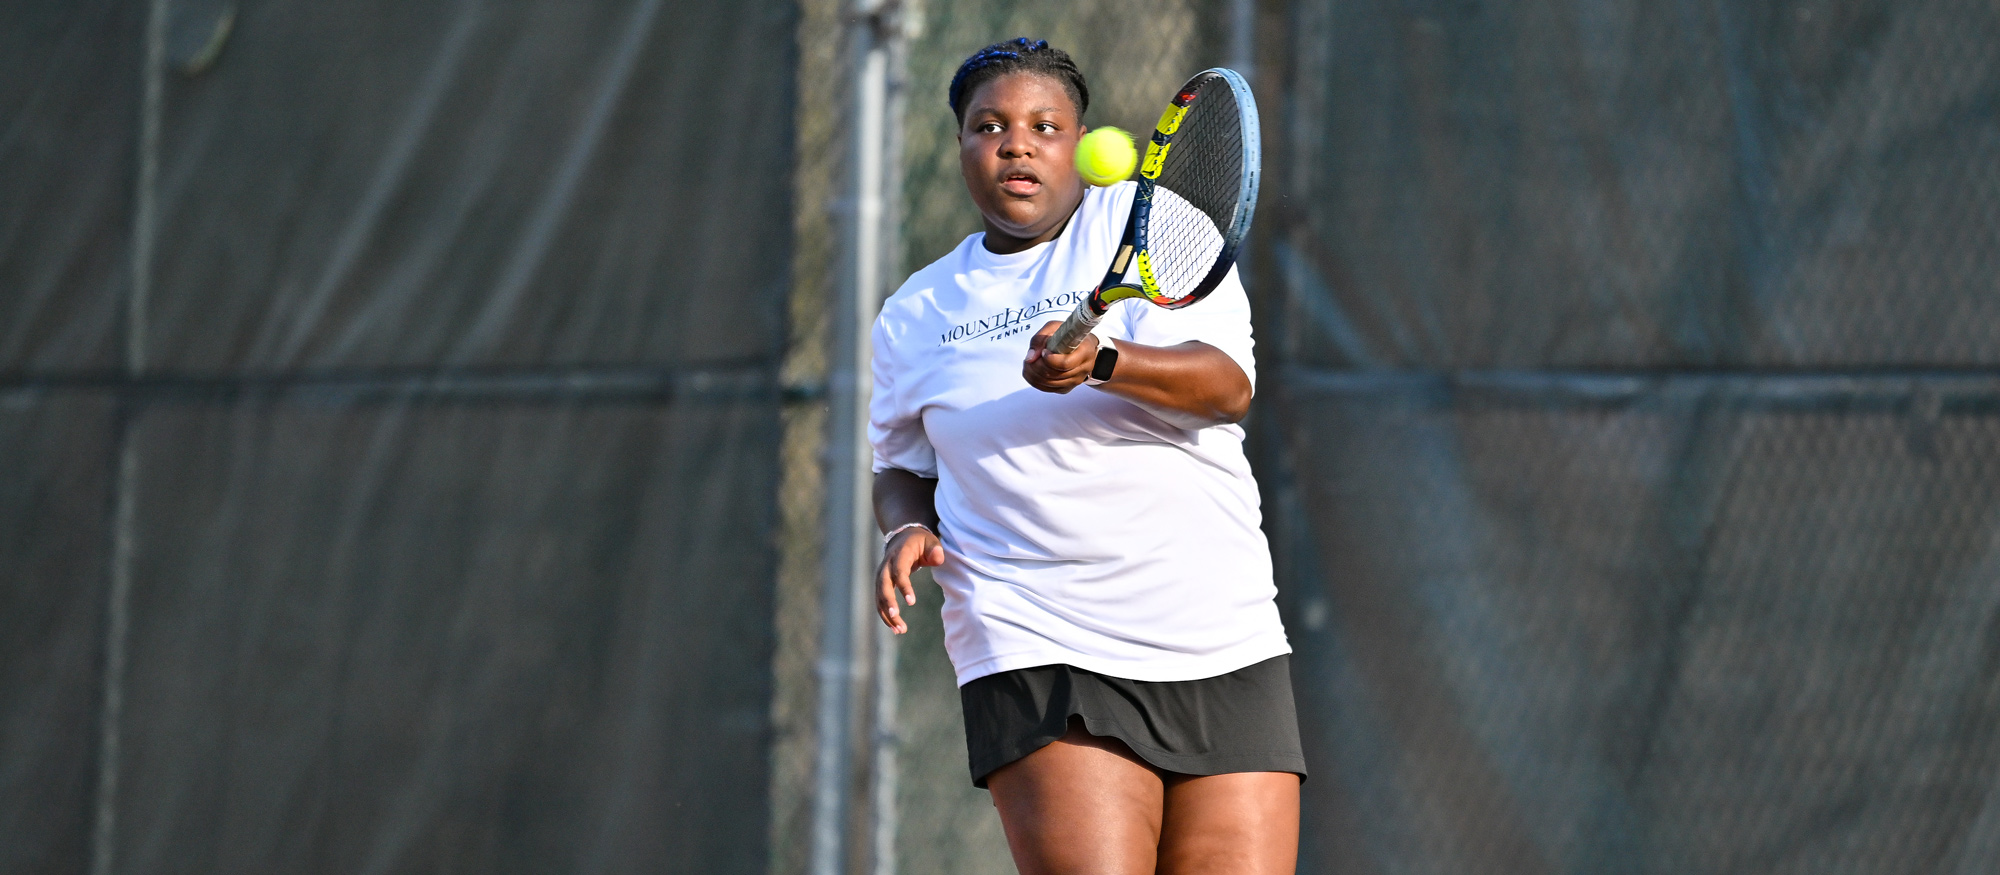 Kennedy Bagley-Fortner and five teammates all went 2-0 with wins at doubles and singles in Mount Holyoke's 9-0 victory at Clark University on April 11, 2023. (RJB Sports file photo)